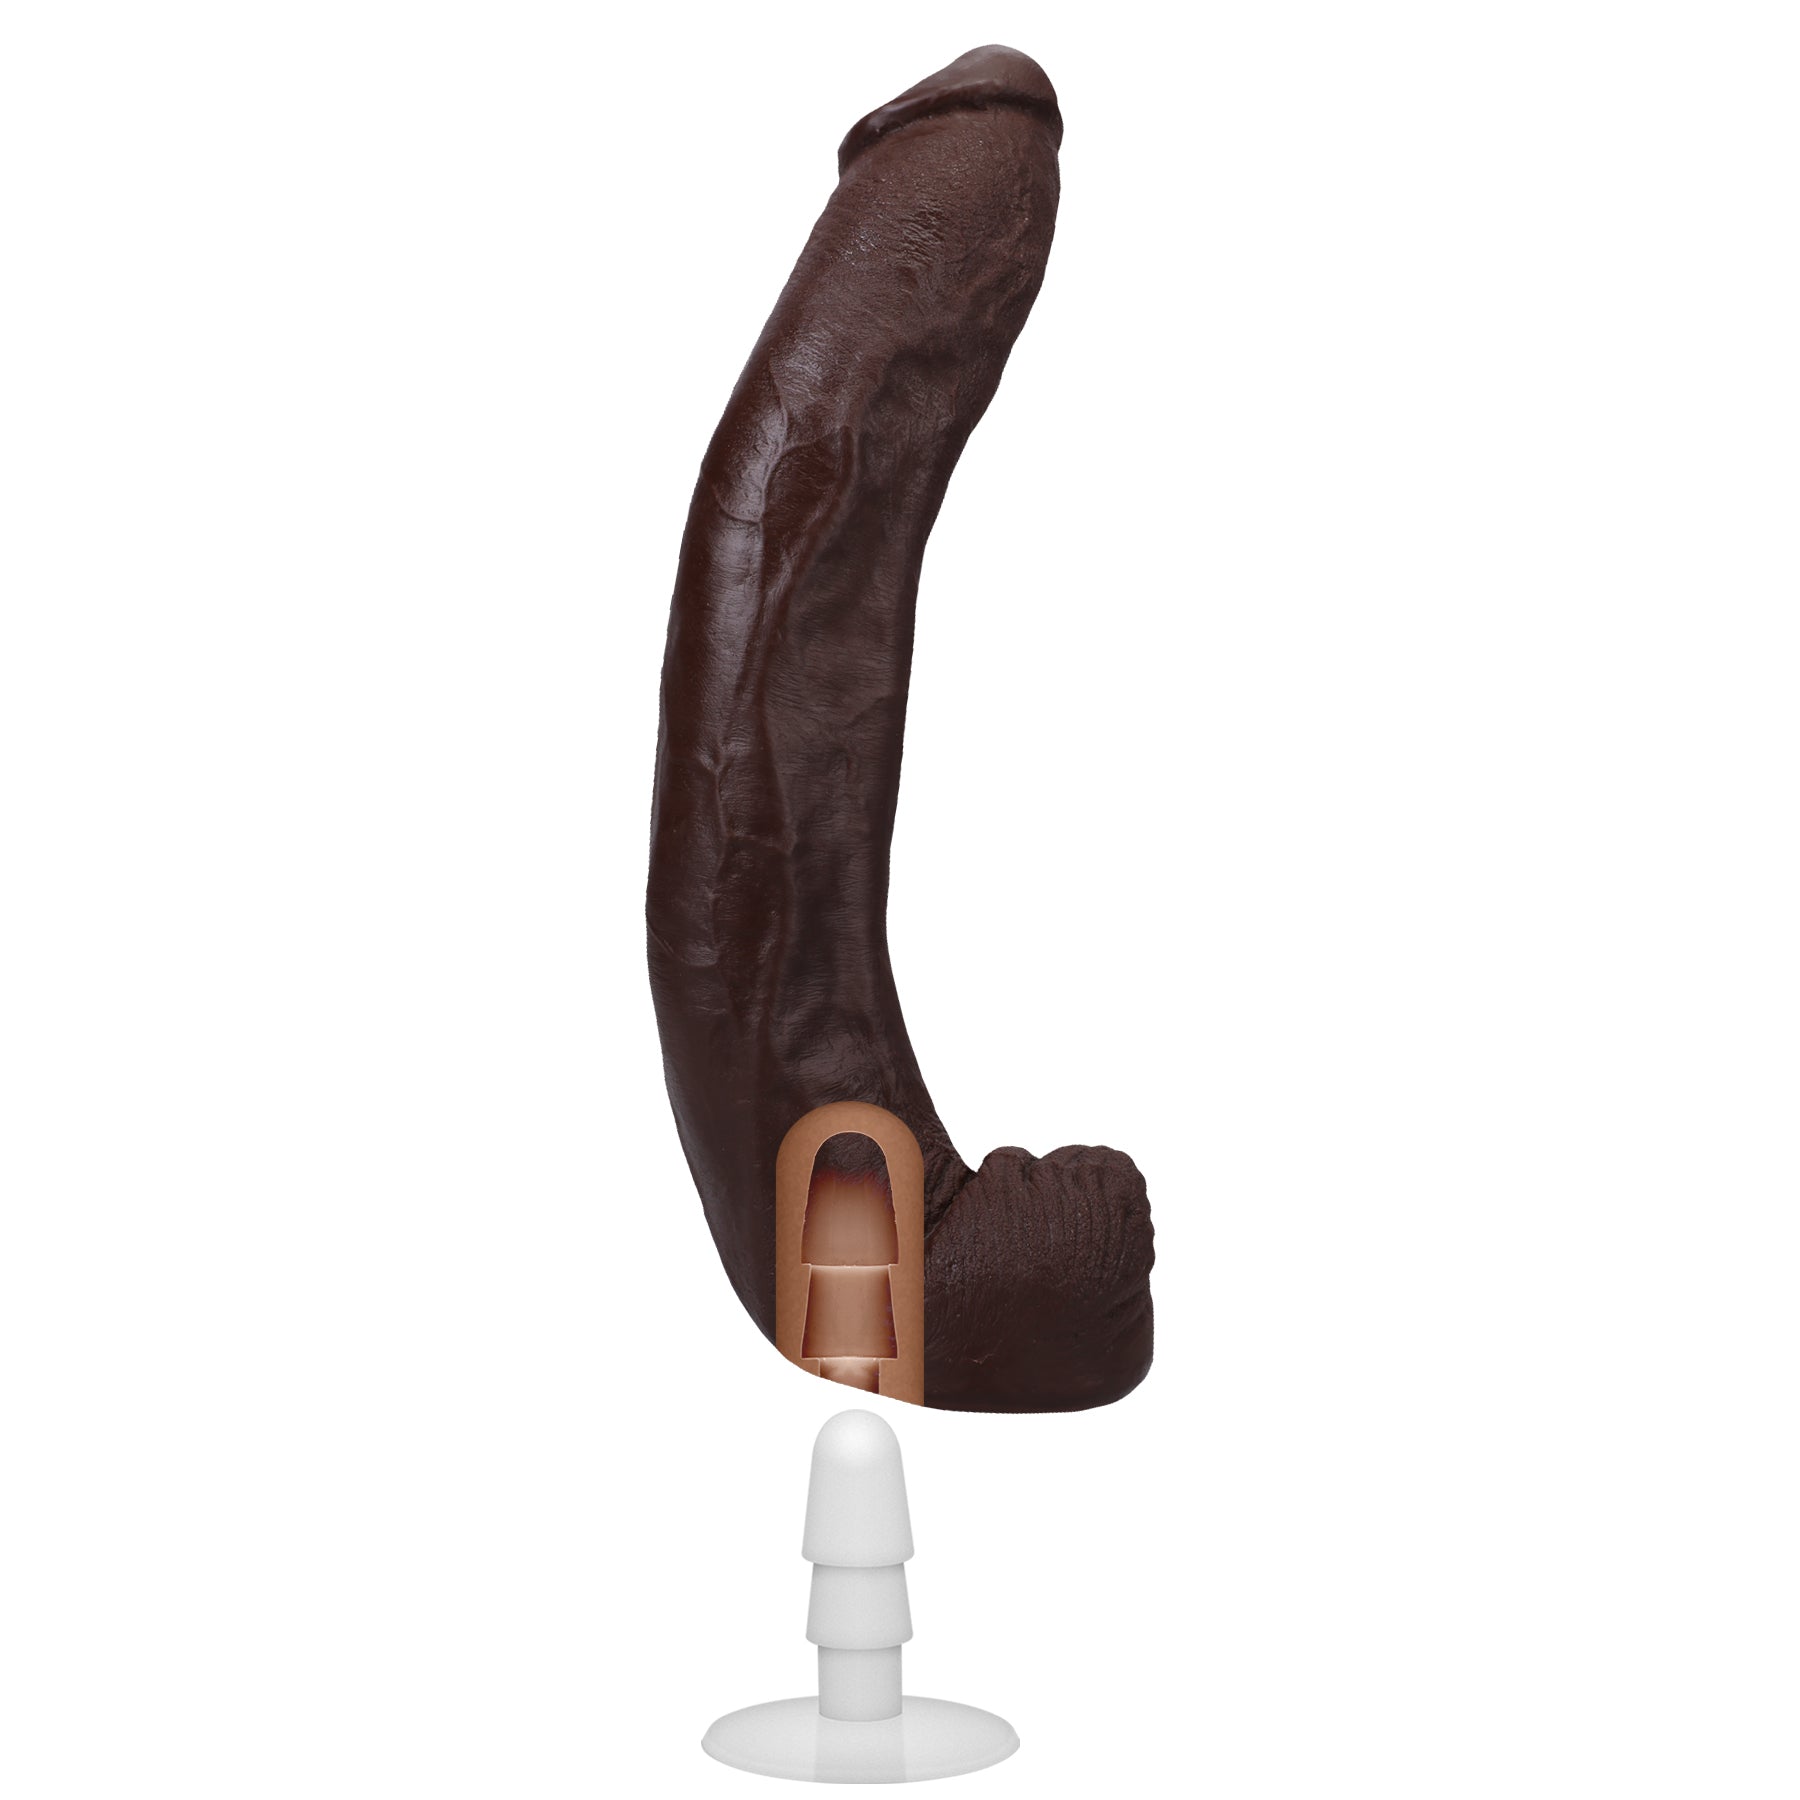 Signature Cocks - Dredd - 13.5 Inch Ultraskyn Cock With Removable Vac-U-Lock Suction Cup - Chocolate-0